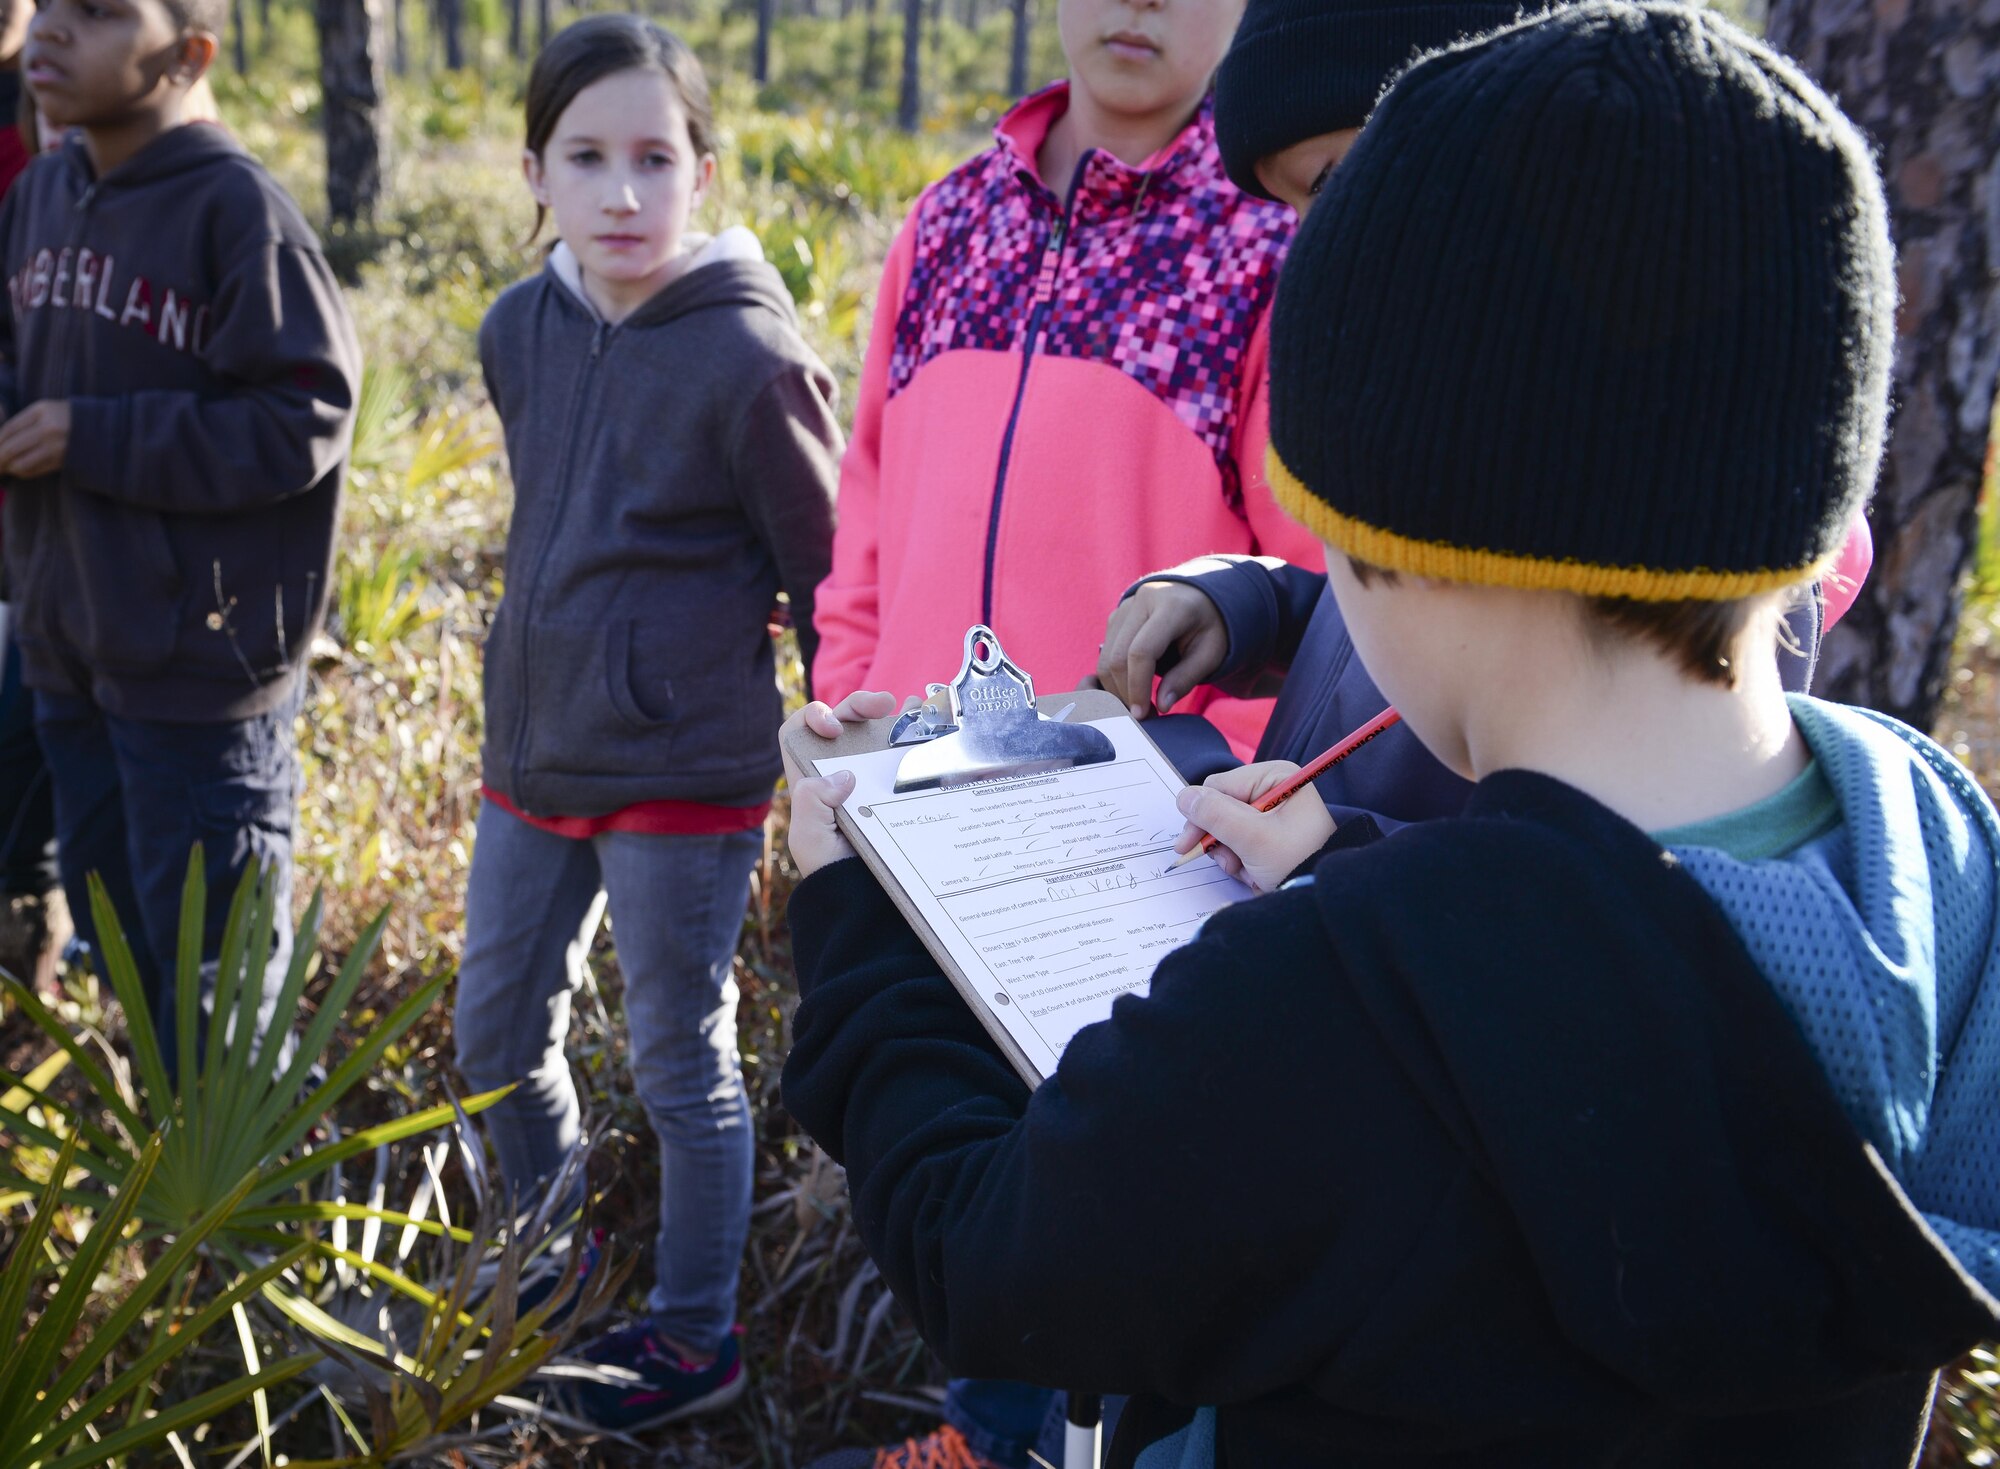 A child from Hurlburt's youth group fills out a list at Hurlburt Field, Fla., Feb. 5, 2015. While searching for the cameras, the children are taught about cardinal directions, vegetation identification, hydrologic indicators, wildlife signs and more. (U.S. Air Force photo Senior Airman Meagan Schutter/Released)